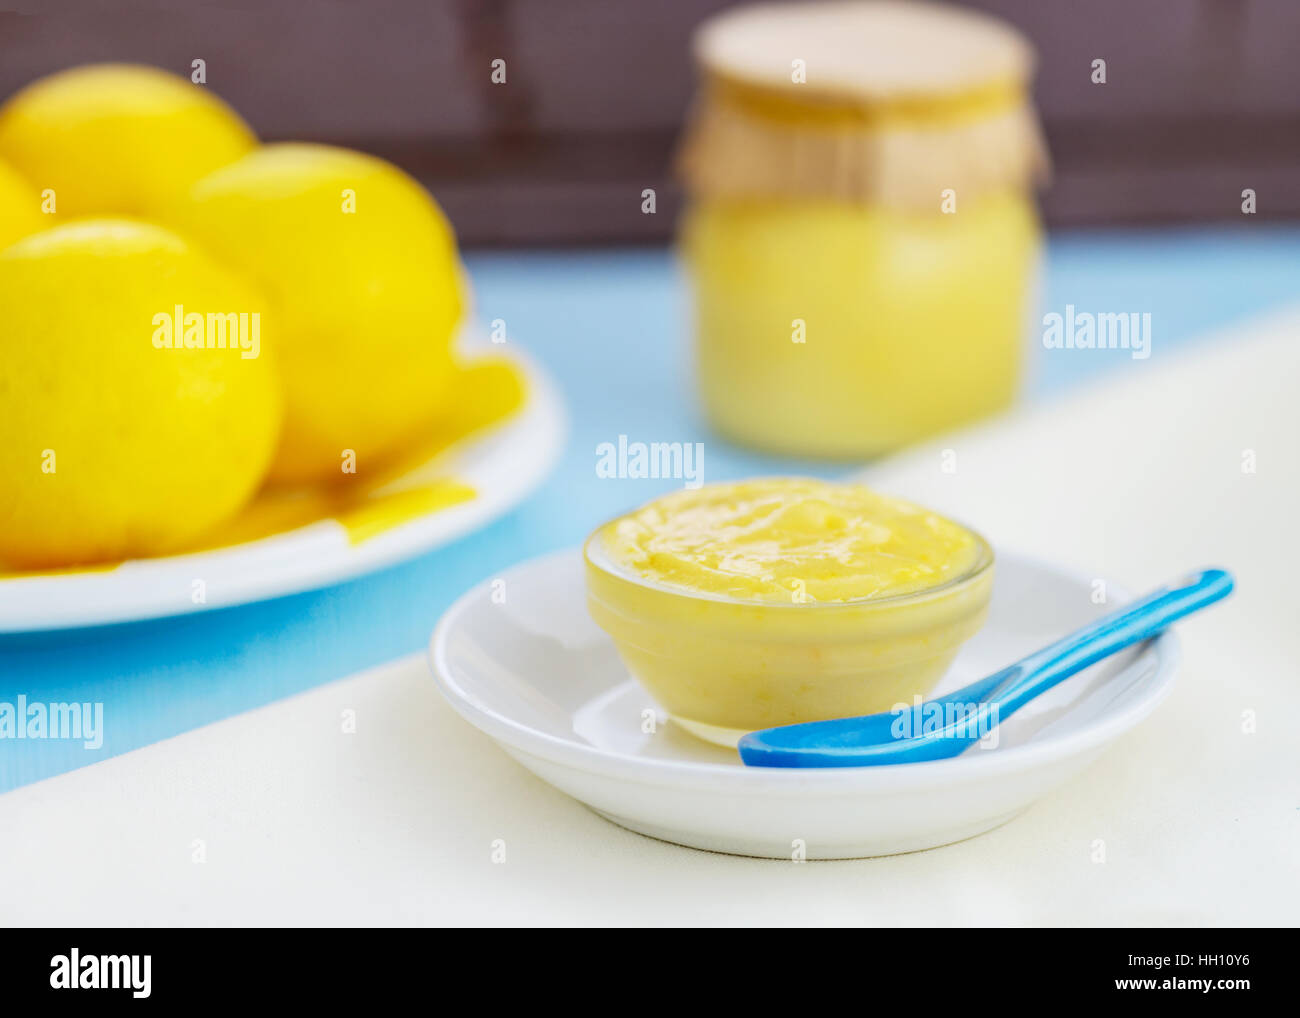 fresh organic homemade lemon curd showing lemons and lemon curd in a jar and glass dish, pretty with light blue and yellow colors, room for copy space Stock Photo